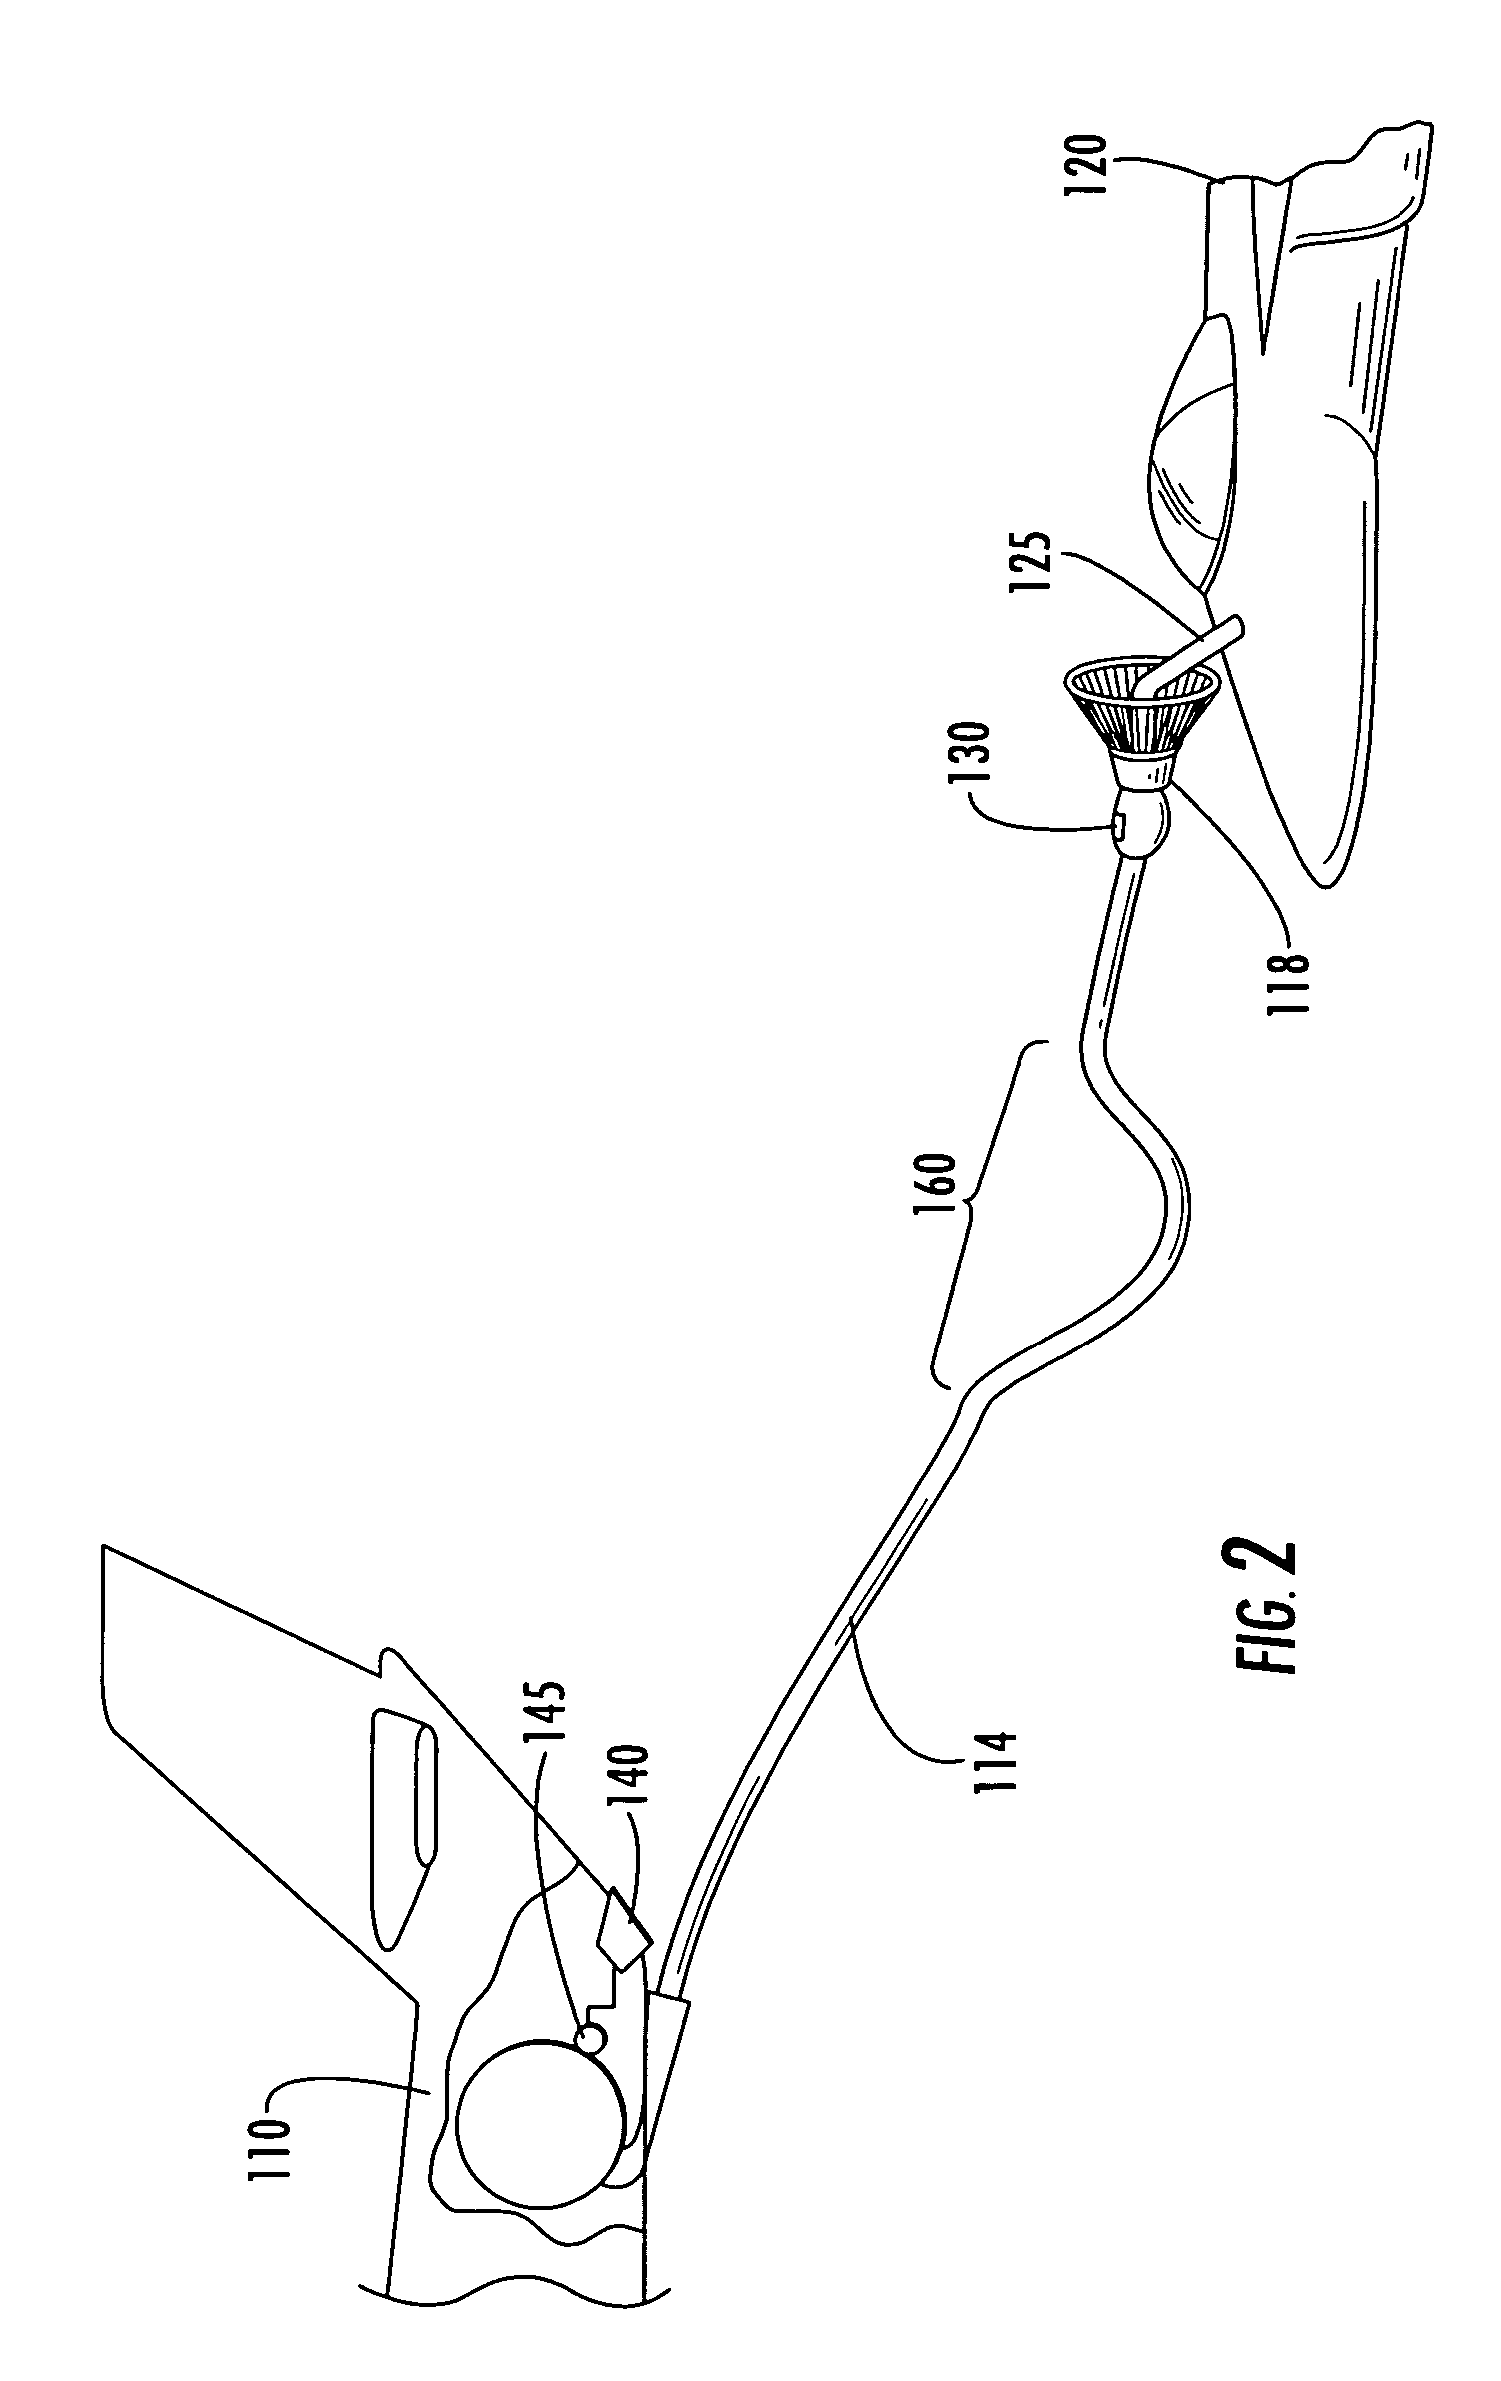 In-flight refueling system, sensor system and method for damping oscillations in in-flight refueling system components